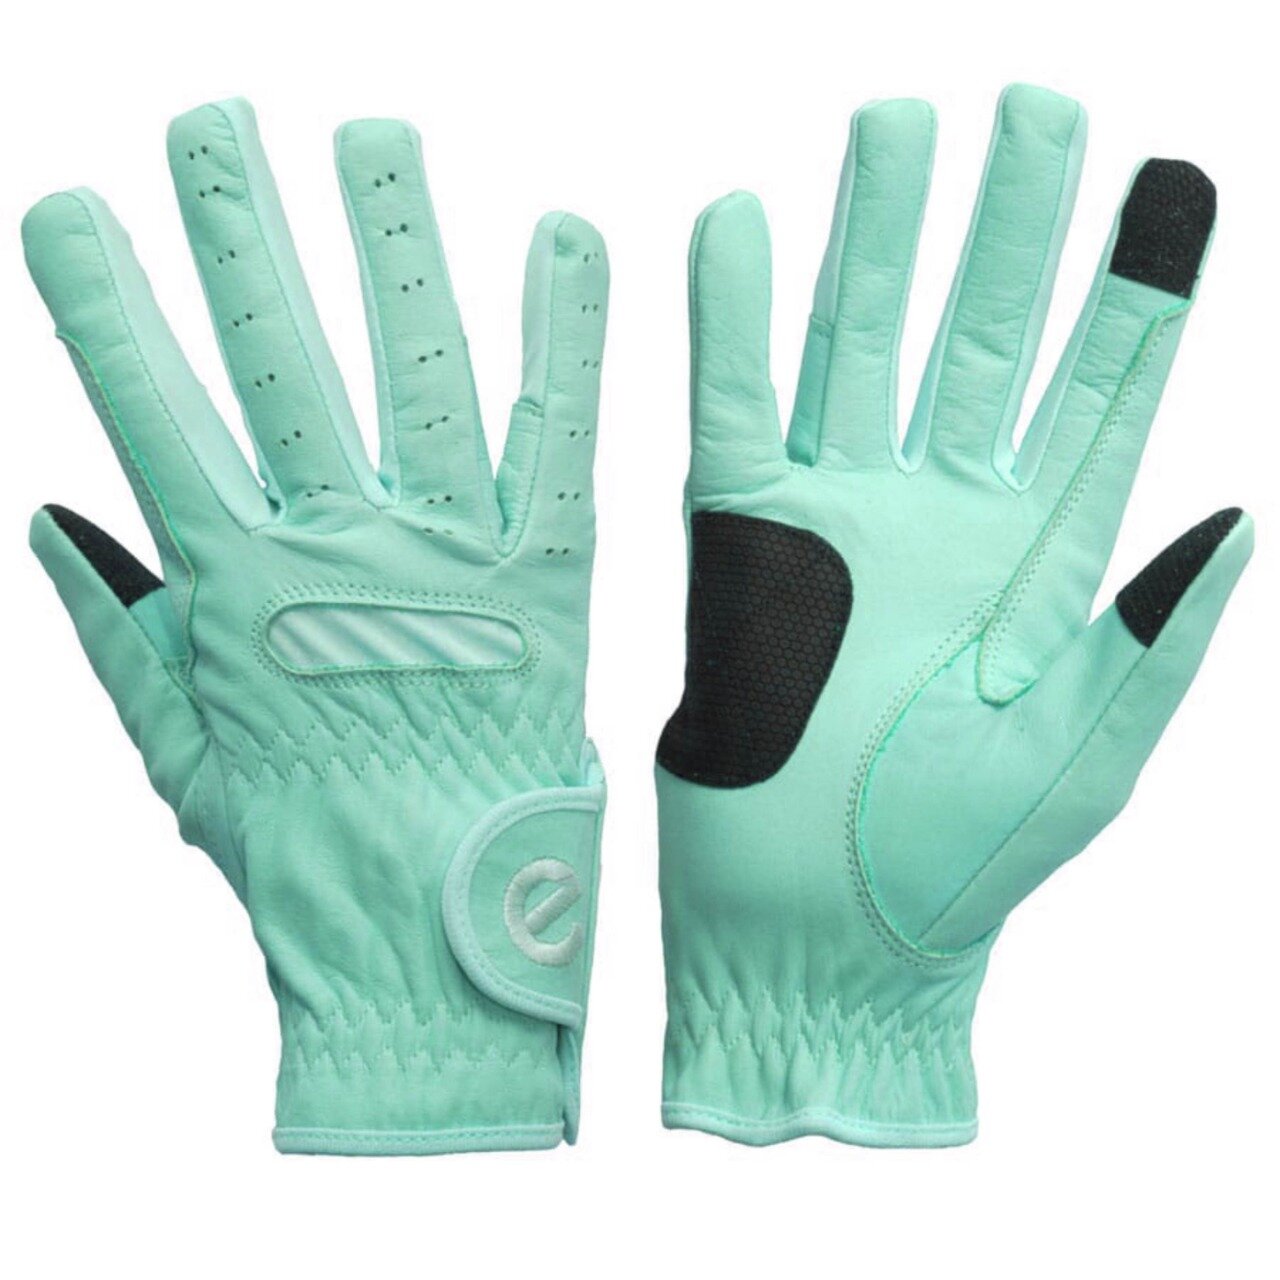 Gloves - eQuest Grip Pro Leather - Mint Green